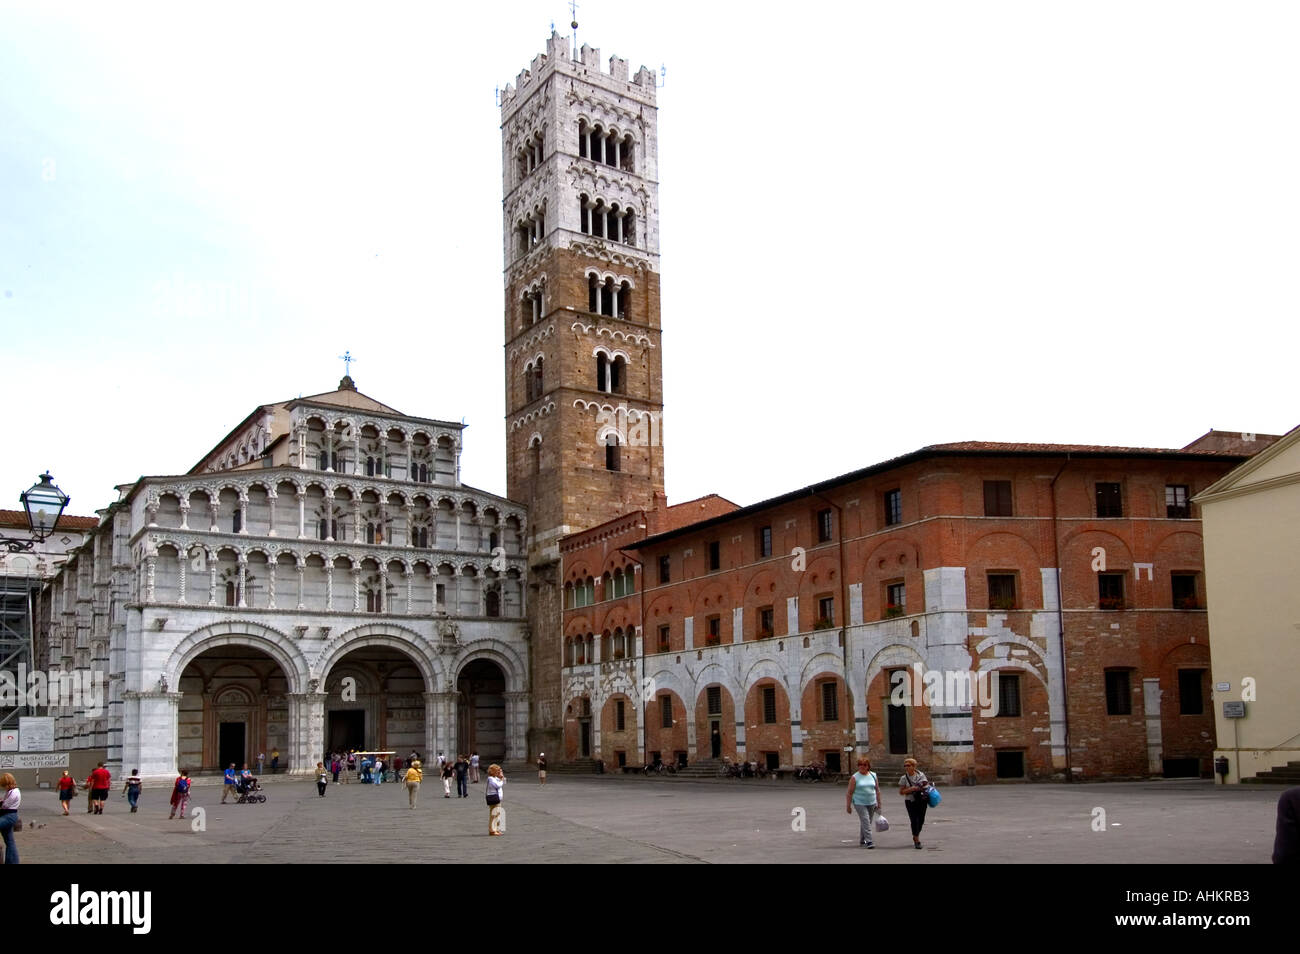 Lucca Cathedral is a Roman Catholic cathedral dedicated to Saint Martin of Tours in Lucca, Italy. It is the seat of the Archbishop of Lucca. Construct Stock Photo